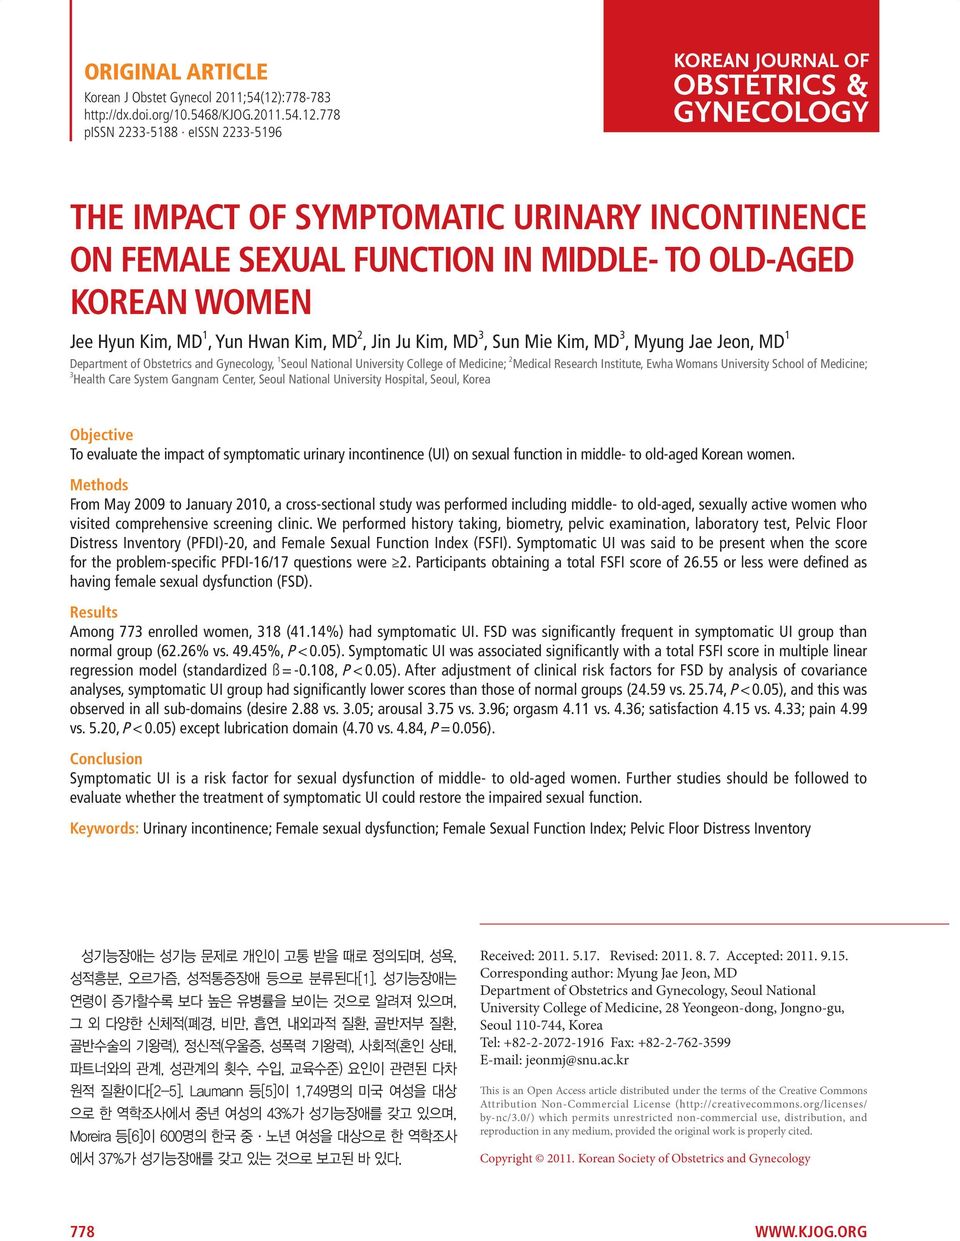 778 pissn 2233-5188 eissn 2233-5196 THE IMPACT OF SYMPTOMATIC URINARY INCONTINENCE ON FEMALE SEXUAL FUNCTION IN MIDDLE- TO OLD-AGED KOREAN WOMEN Jee Hyun Kim, MD 1, Yun Hwan Kim, MD 2, Jin Ju Kim, MD